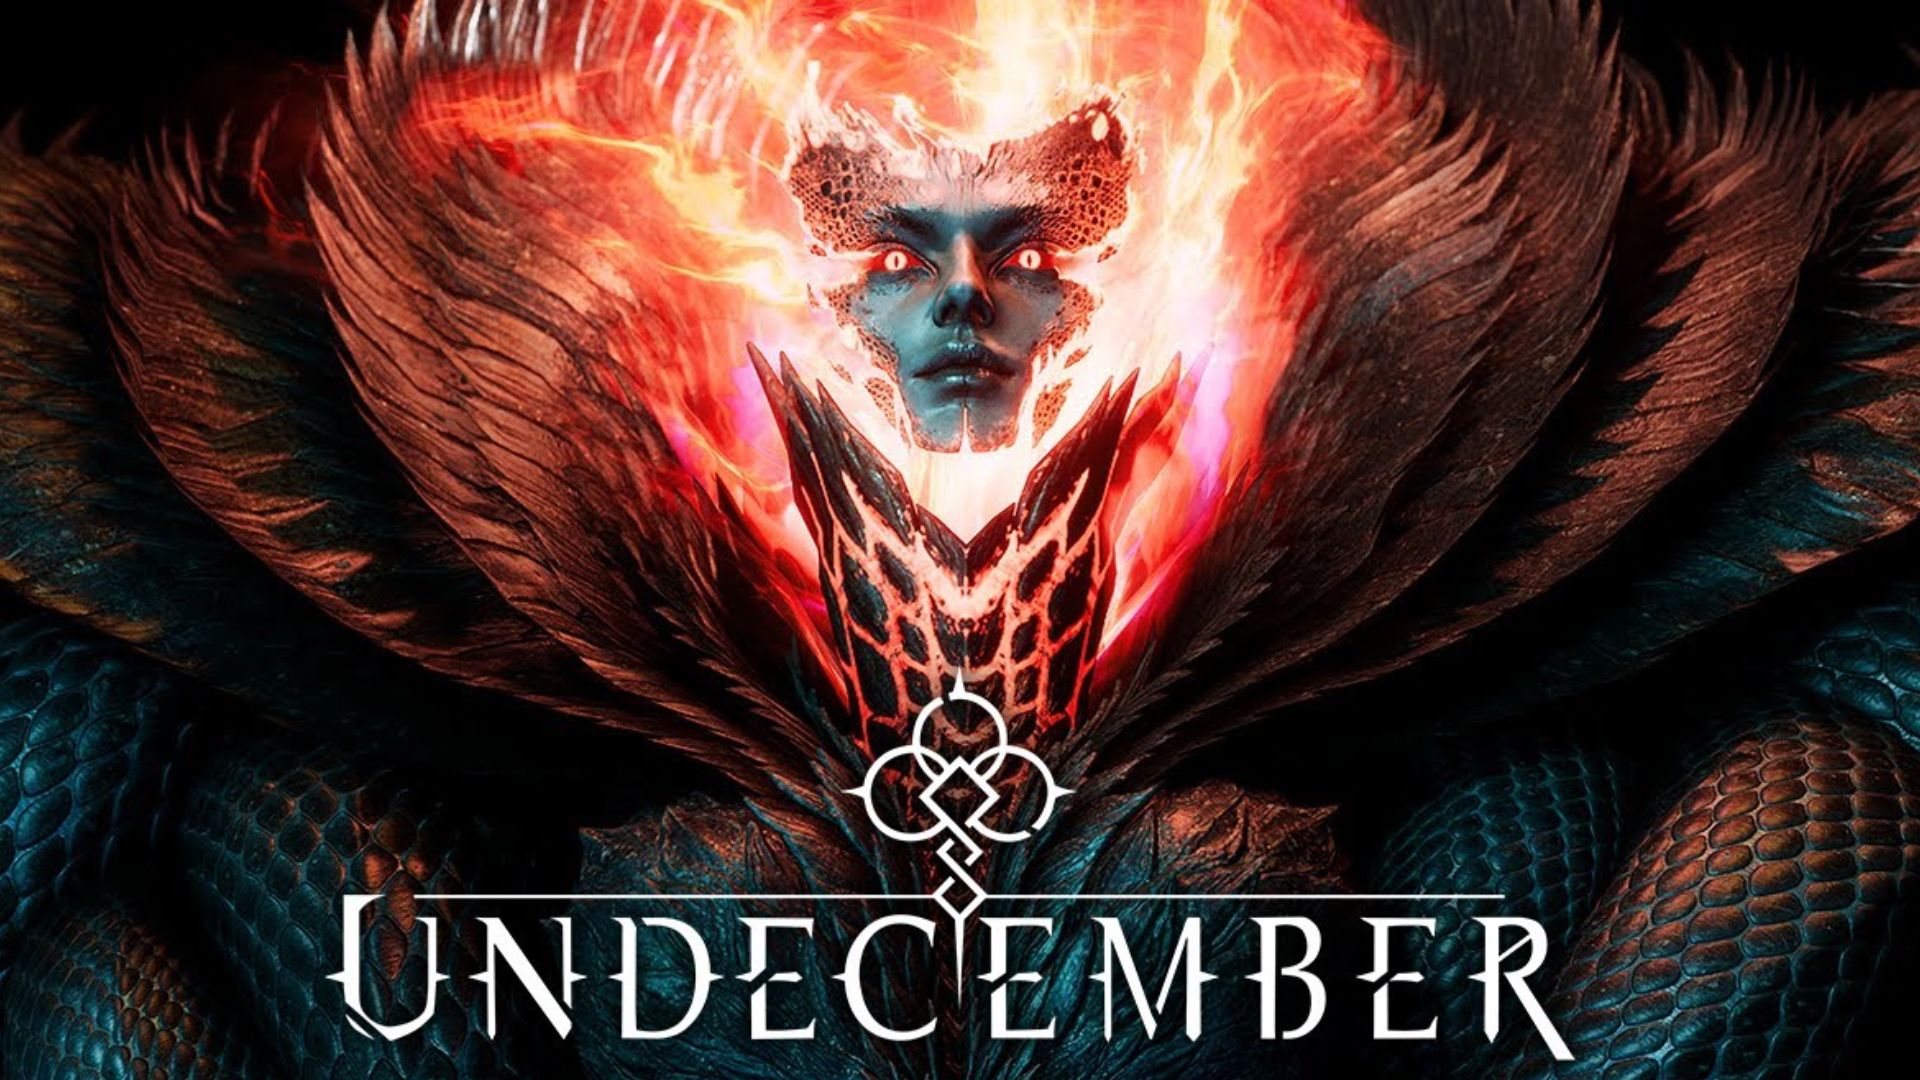 Latest Undecember News and Guides